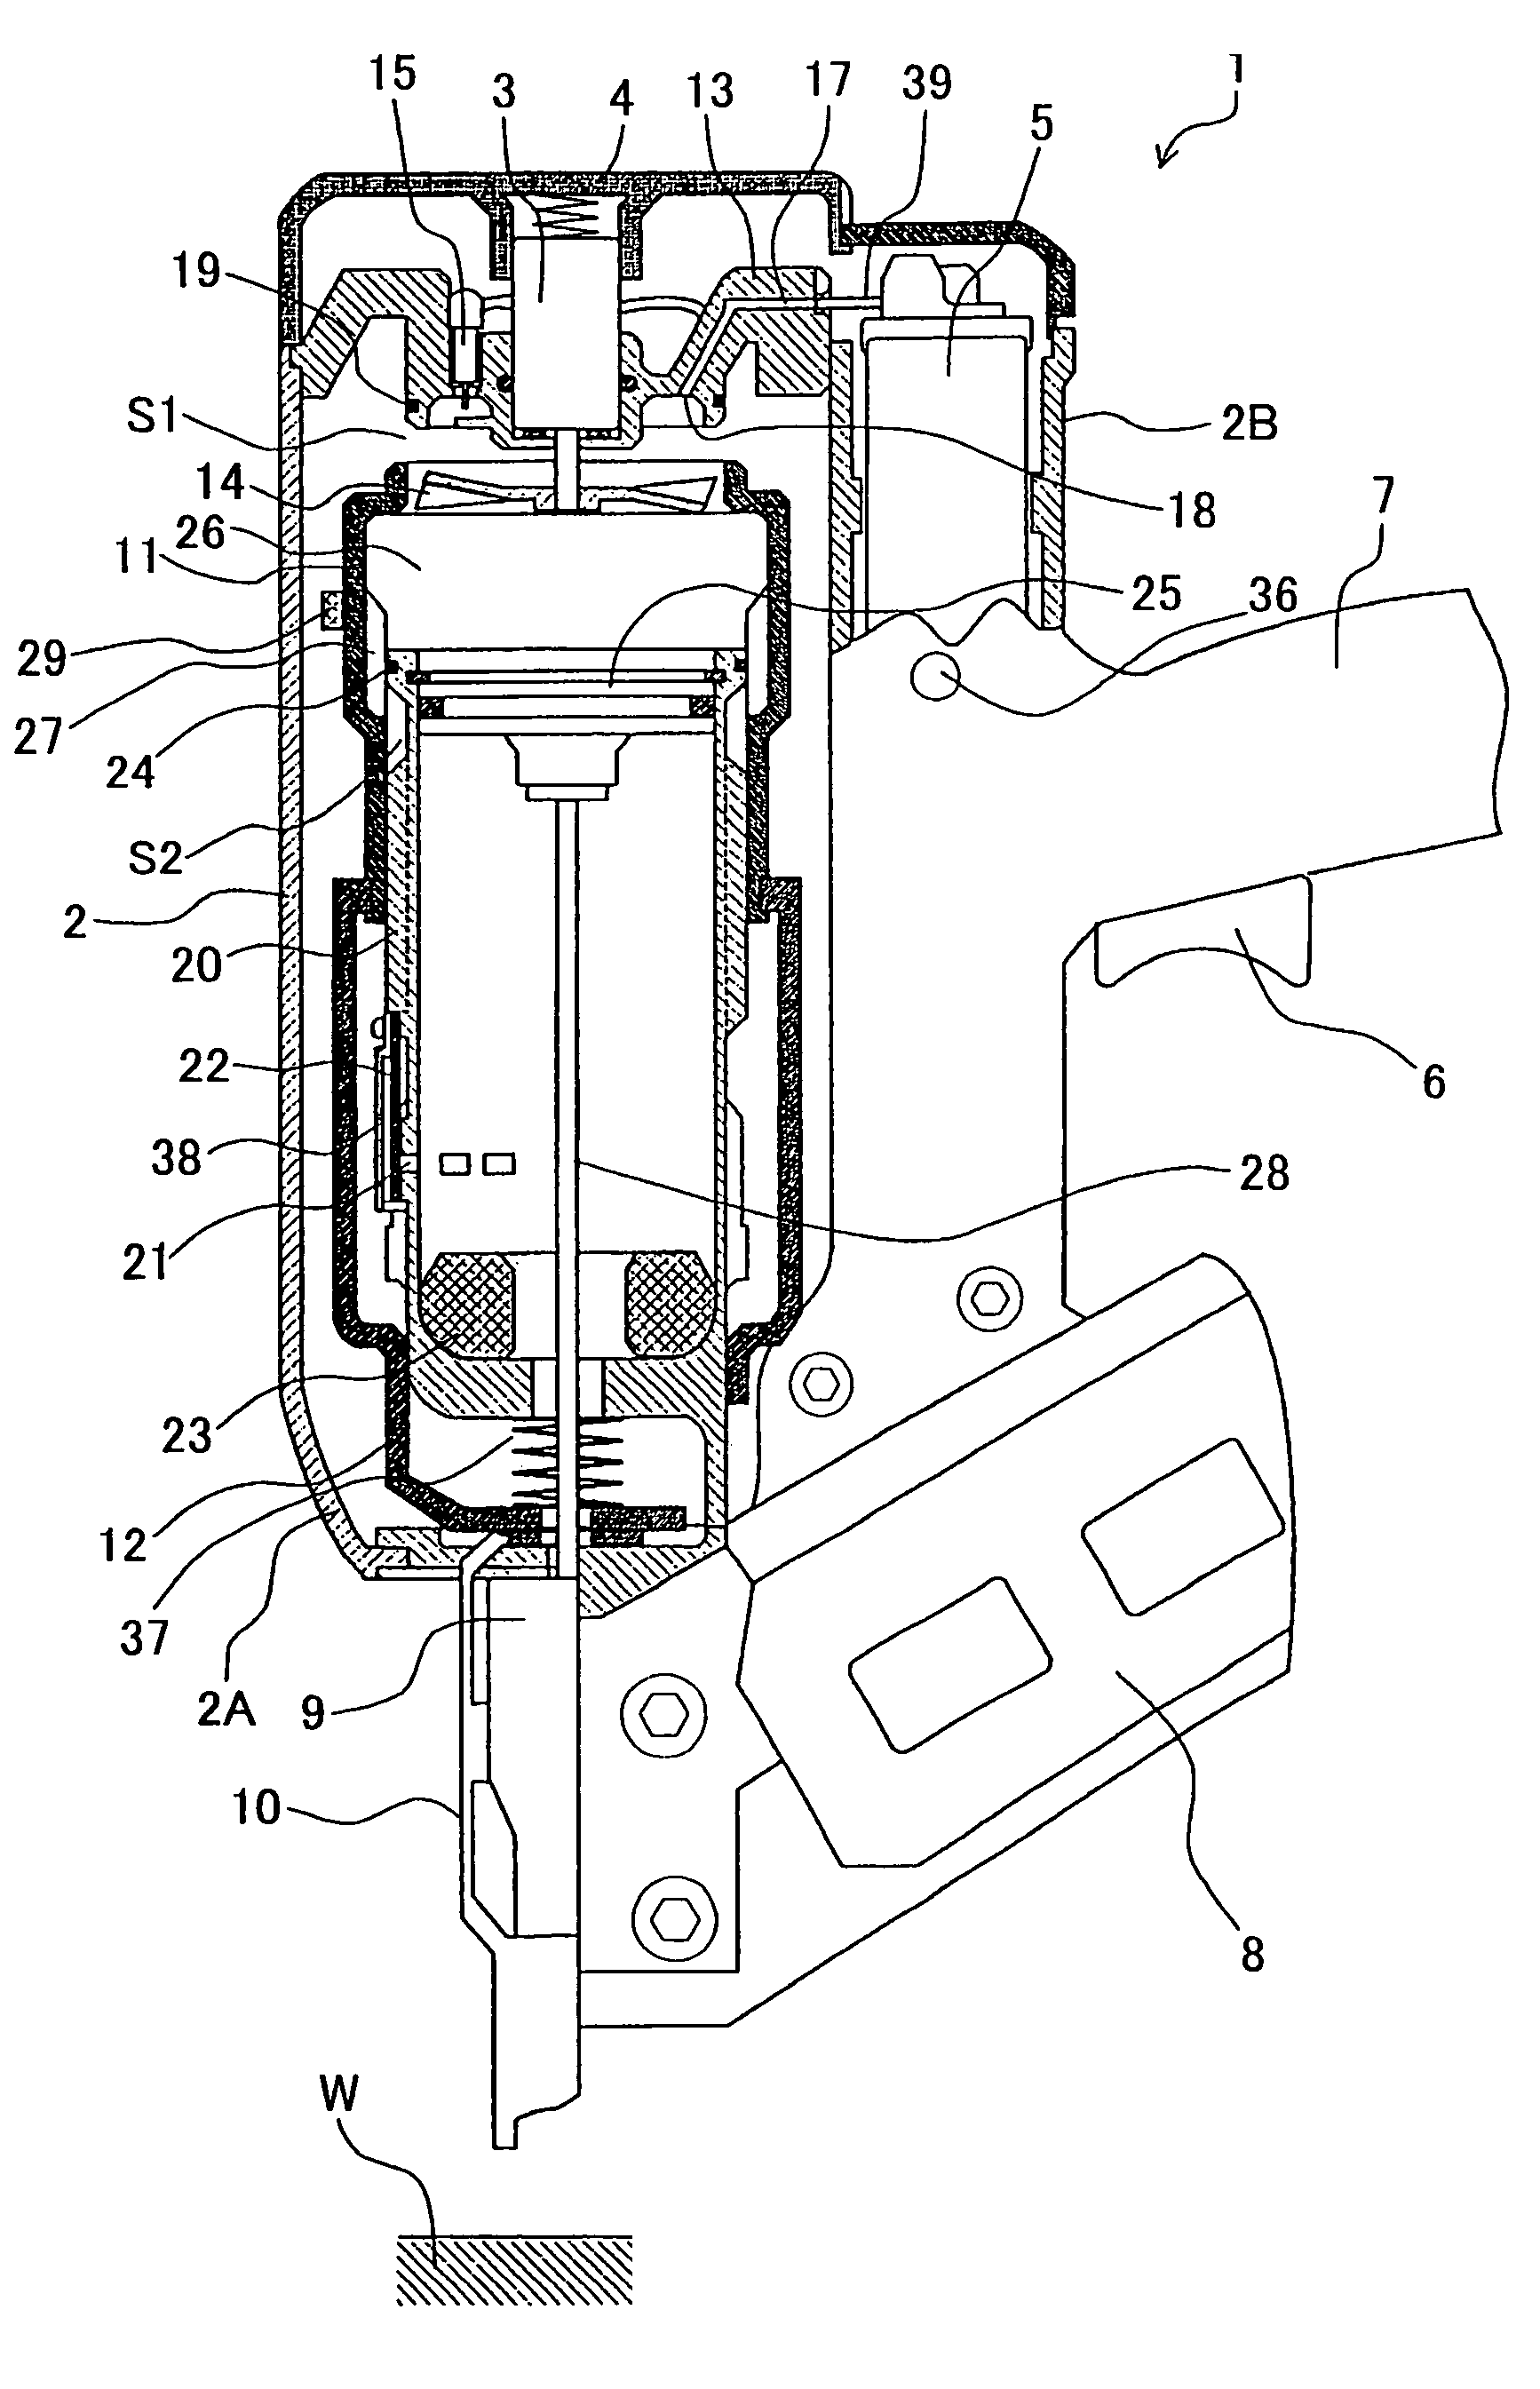 Combustion type power tool having avoiding unit for avoiding overheating to mechanical components in the tool